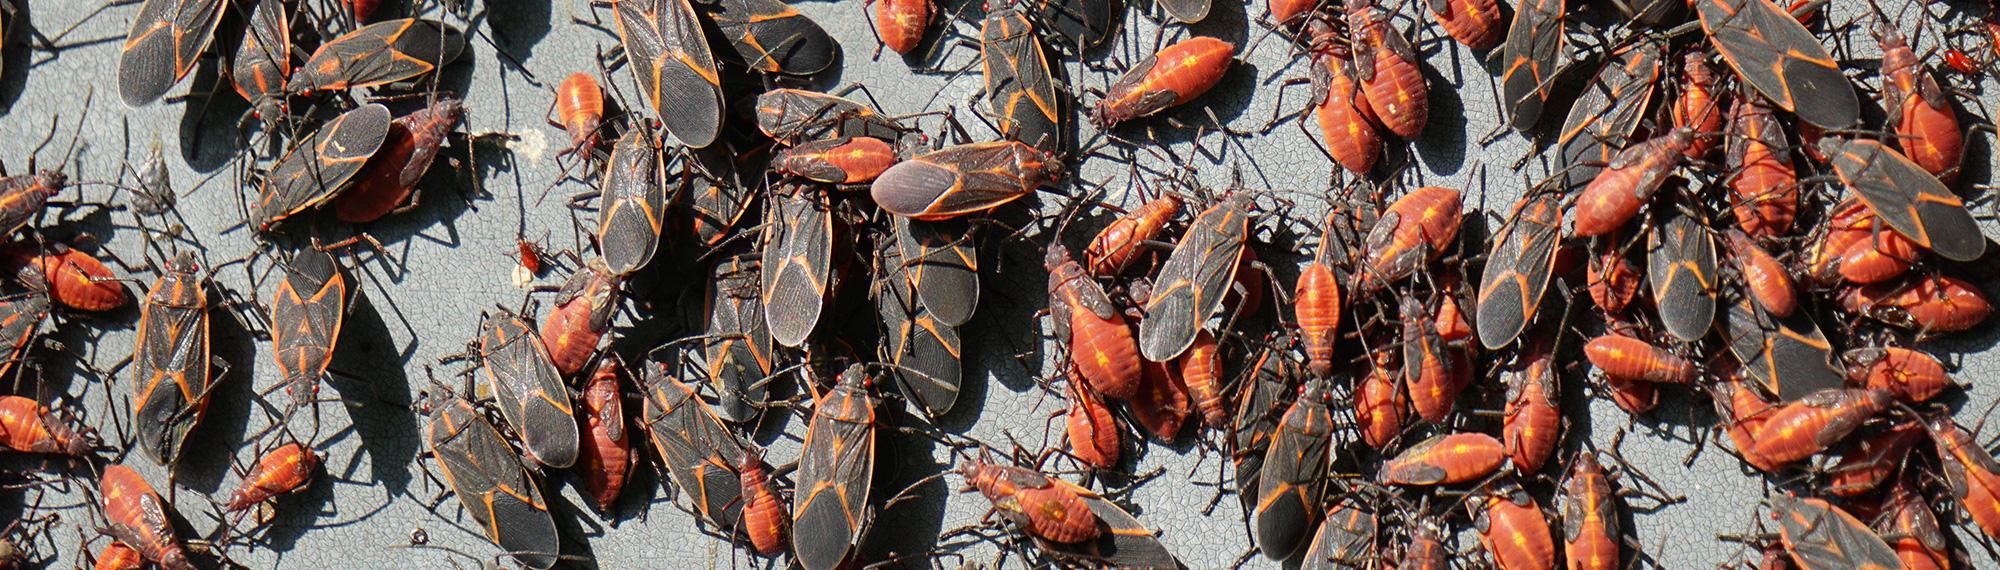 numerous boxelder bugs congregating outside home